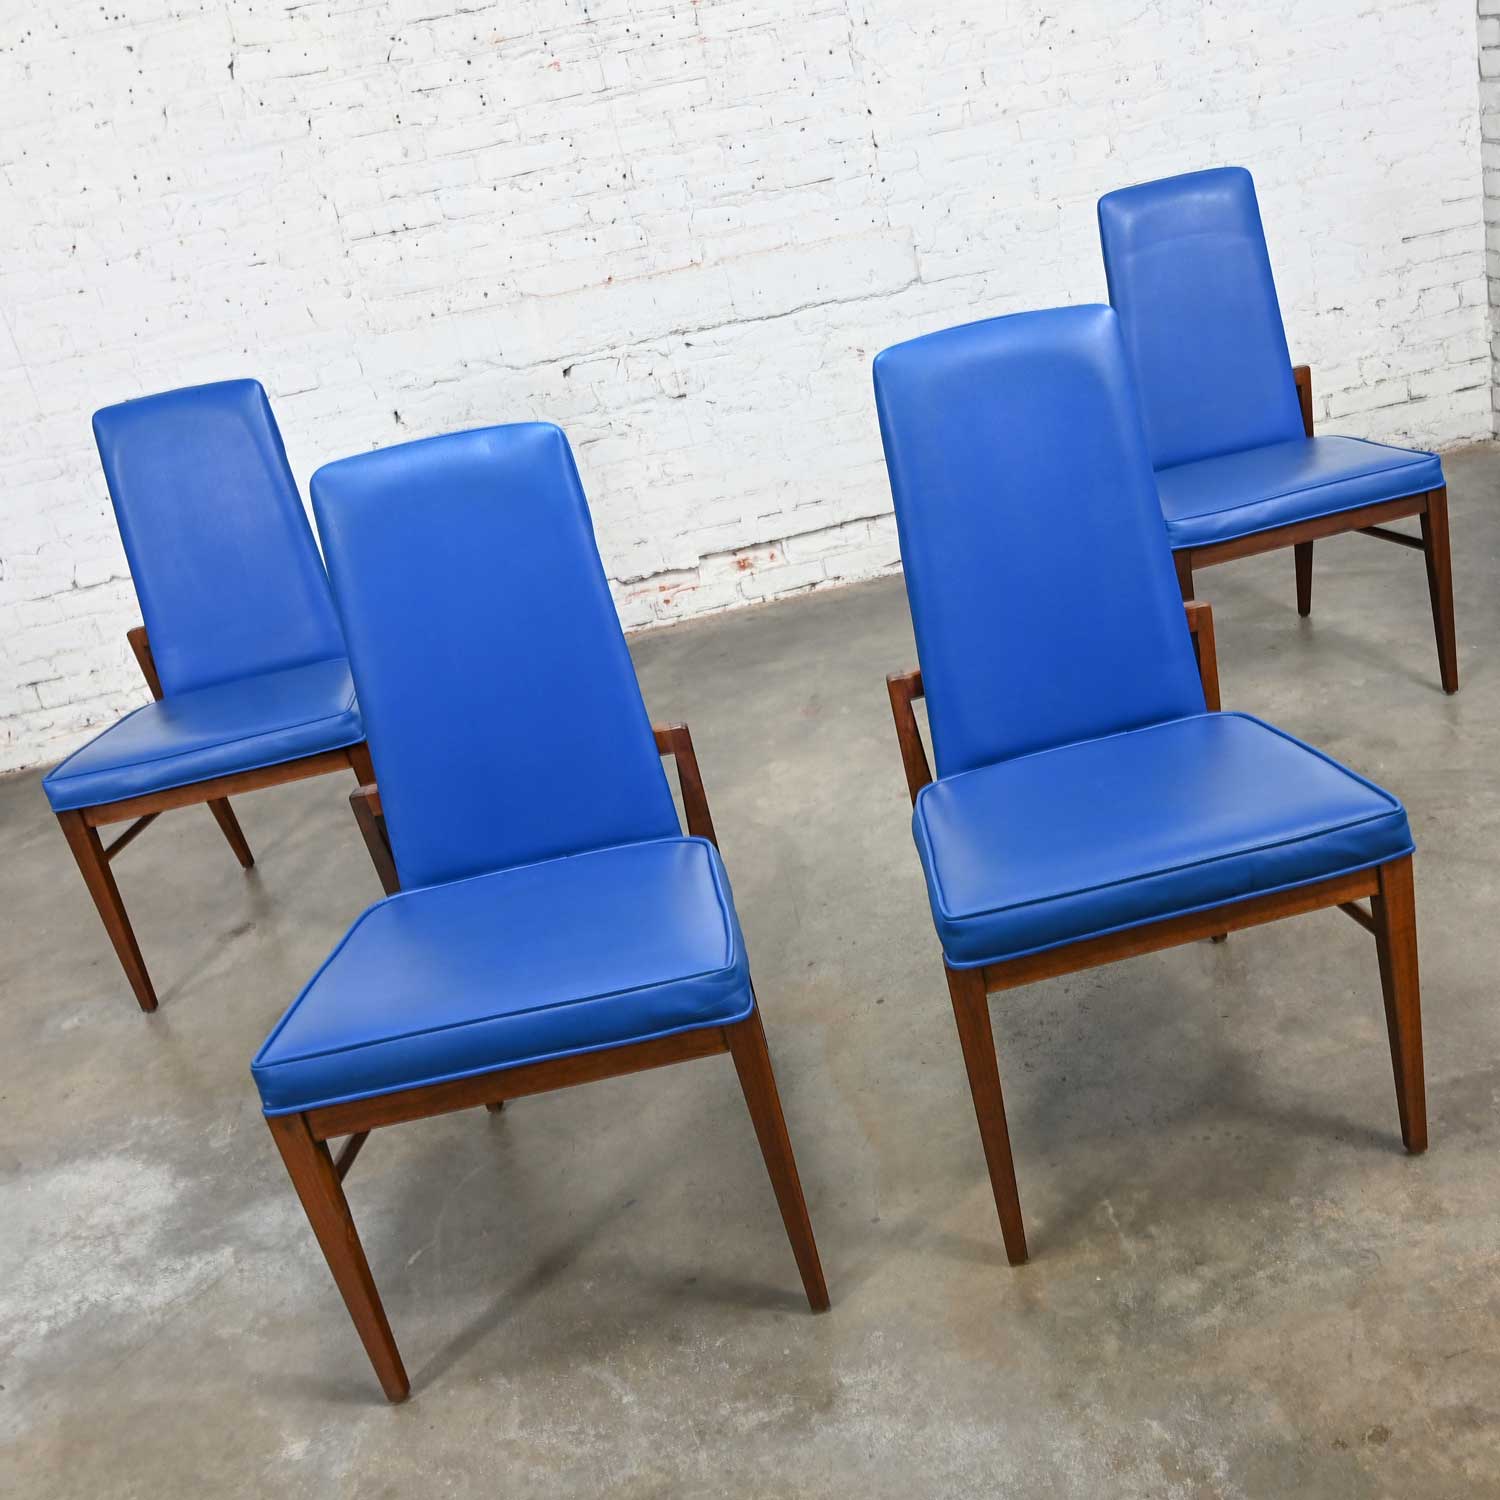 Vintage Mid Century Modern Foster McDavid Cobalt Blue Faux Leather Dining Chairs Set of 4